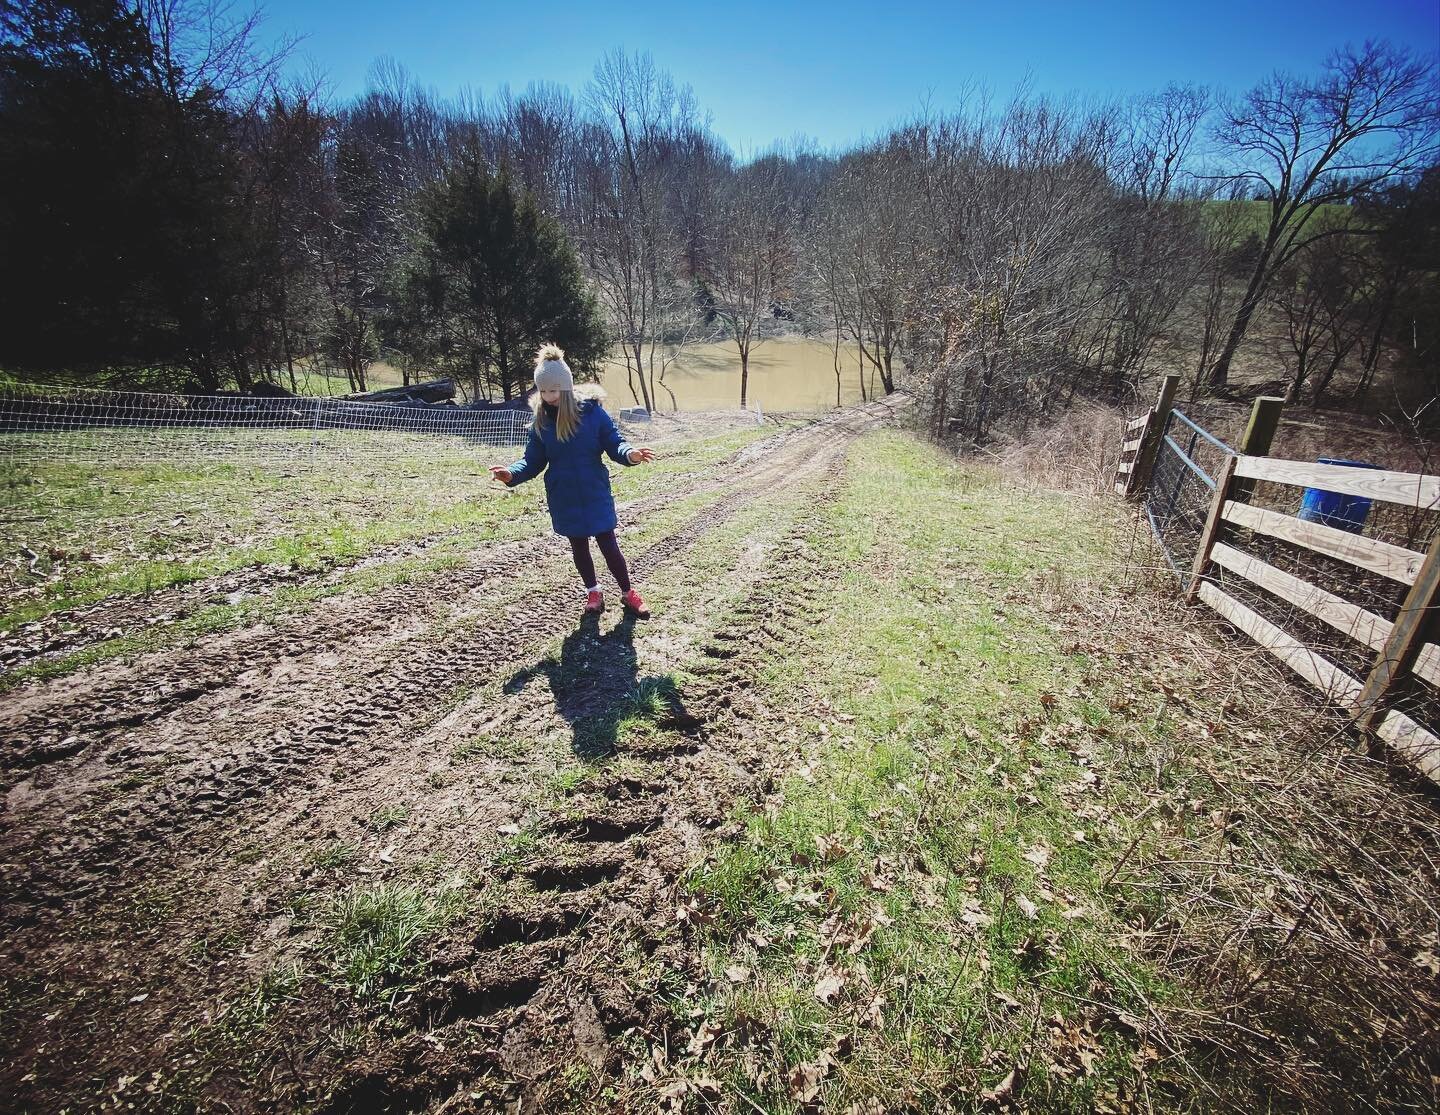 Hana | Nashville, TN

Back in the home of my heart with people I love. I&rsquo;m working on a new project in Bells Bend and I am so happy to be back, even on a freezing cold day! #bellsbend #tennessee #tn #nashville #tennesseetime #countrylife #farml